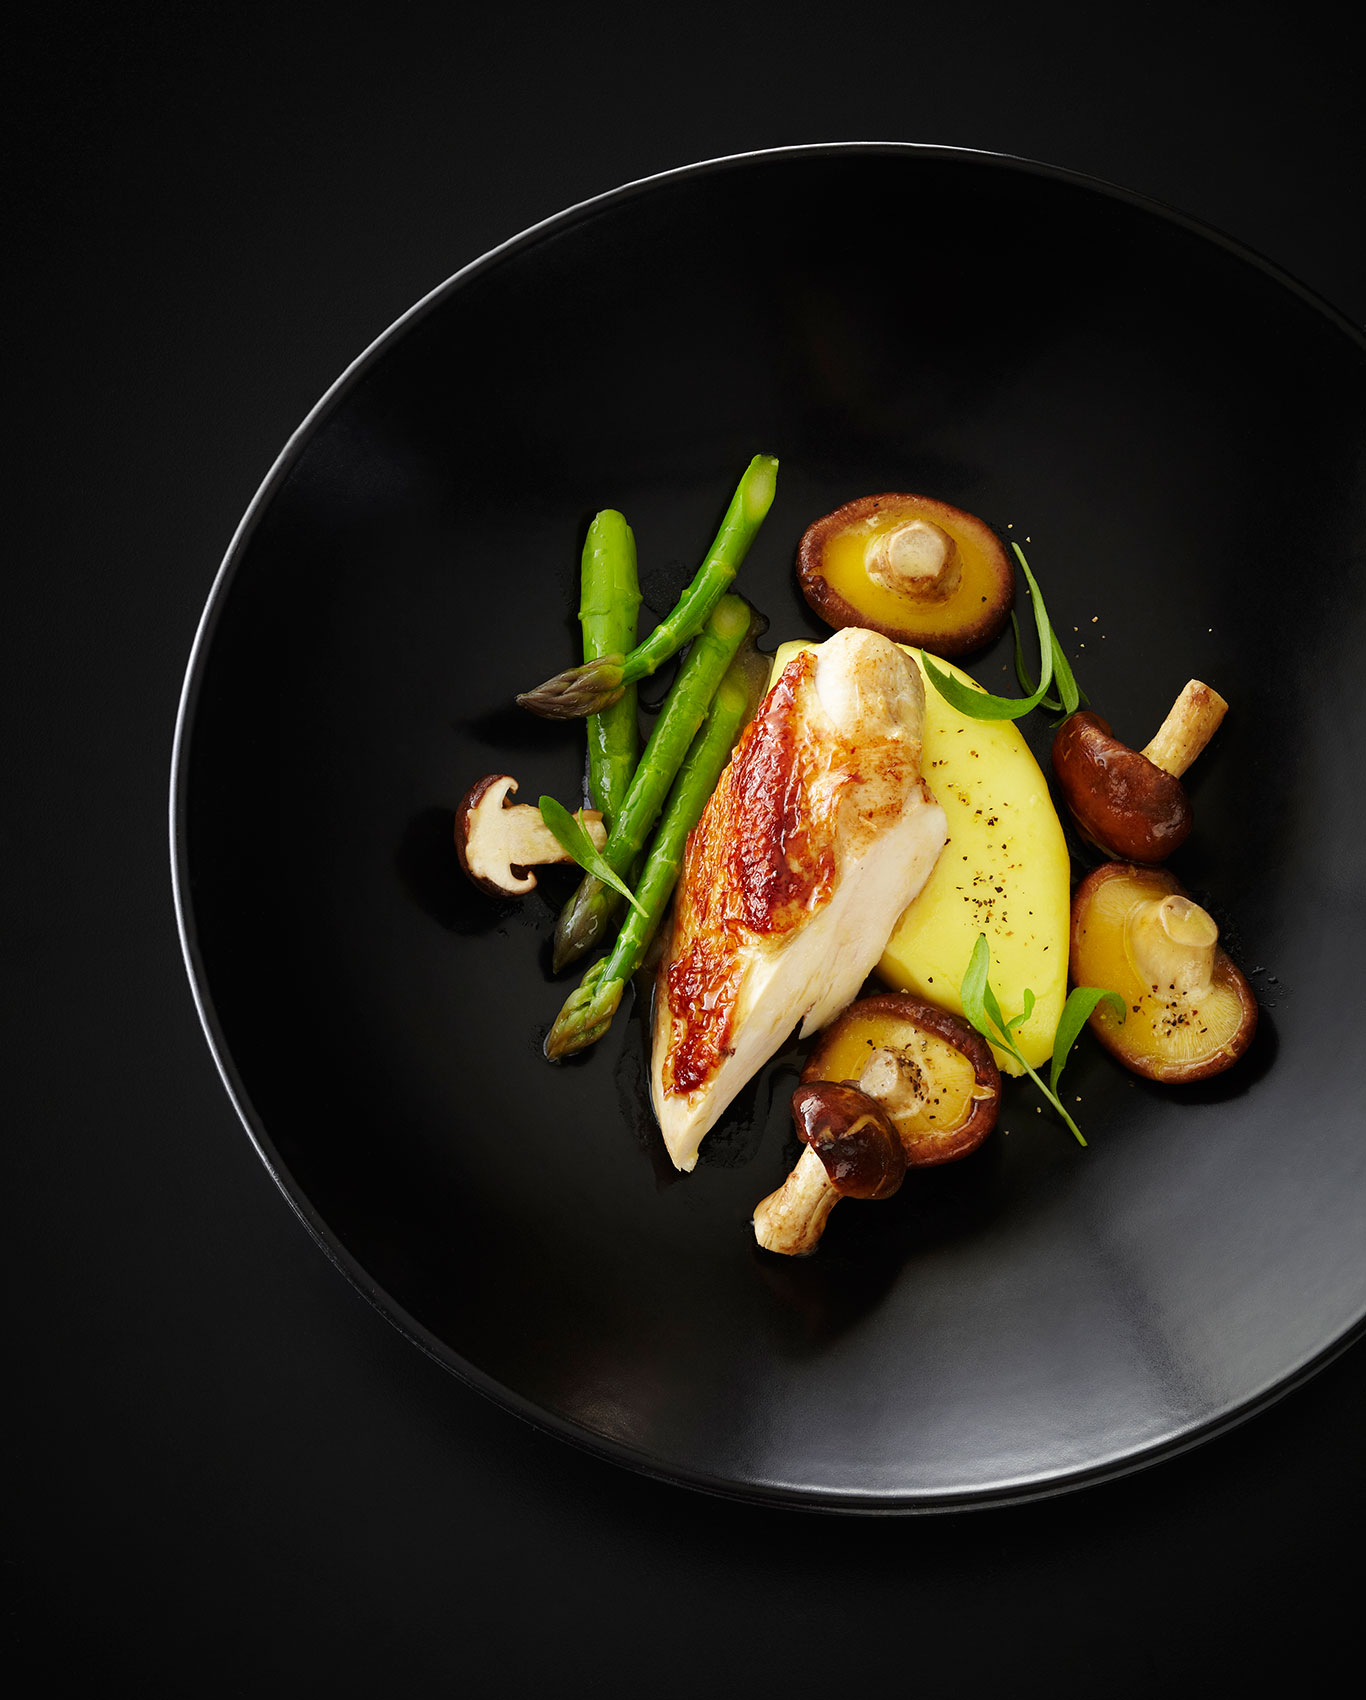 Southon Cooking • The Foodstore Roast Brined Chicken with Asparagus & Mushrooms • Hospitality & Editorial Food Photography